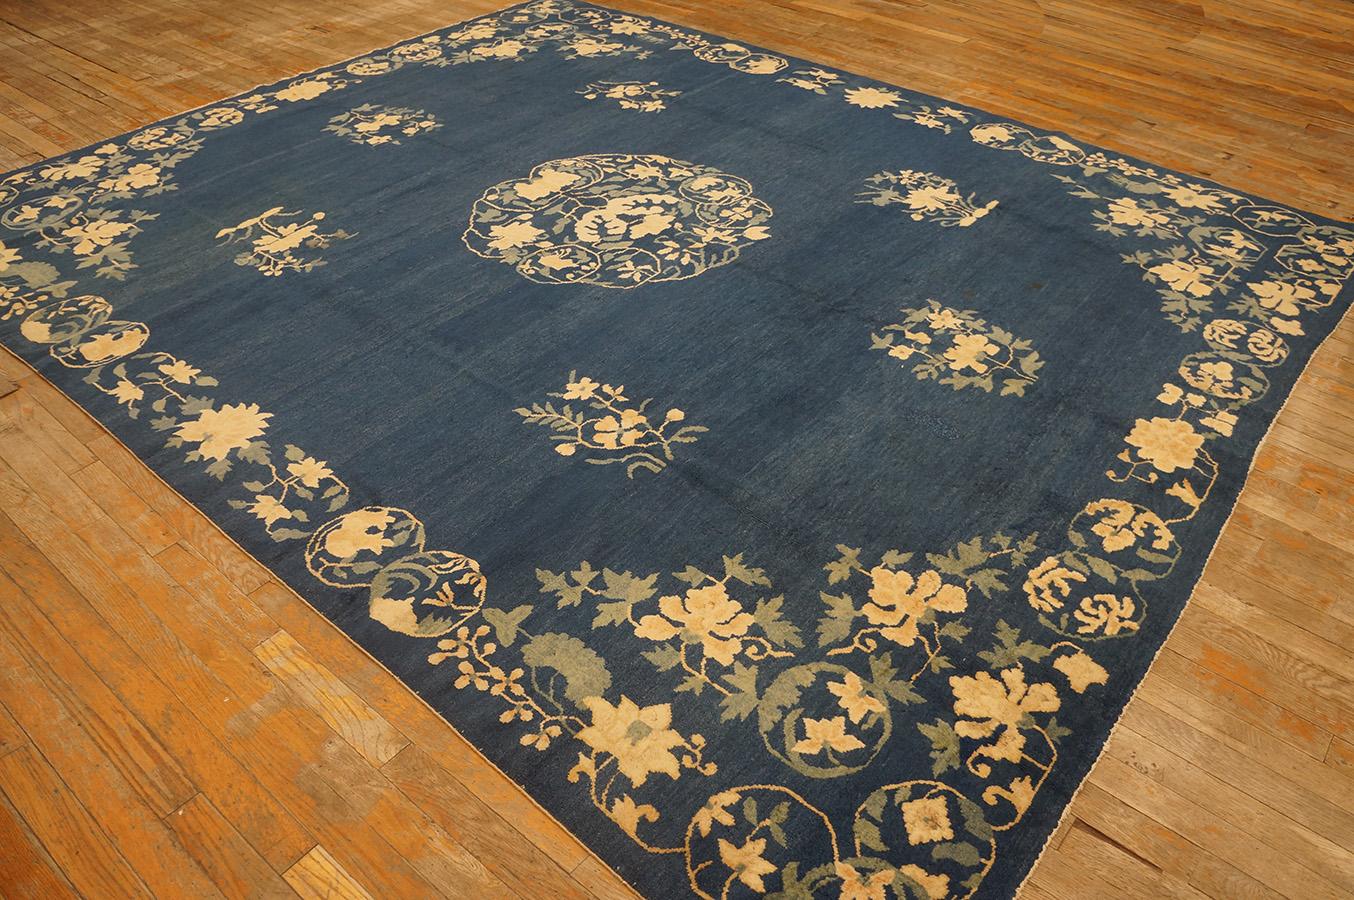 Wool Antique Chinese Peking Rug 8' 0''x 9' 6'' For Sale